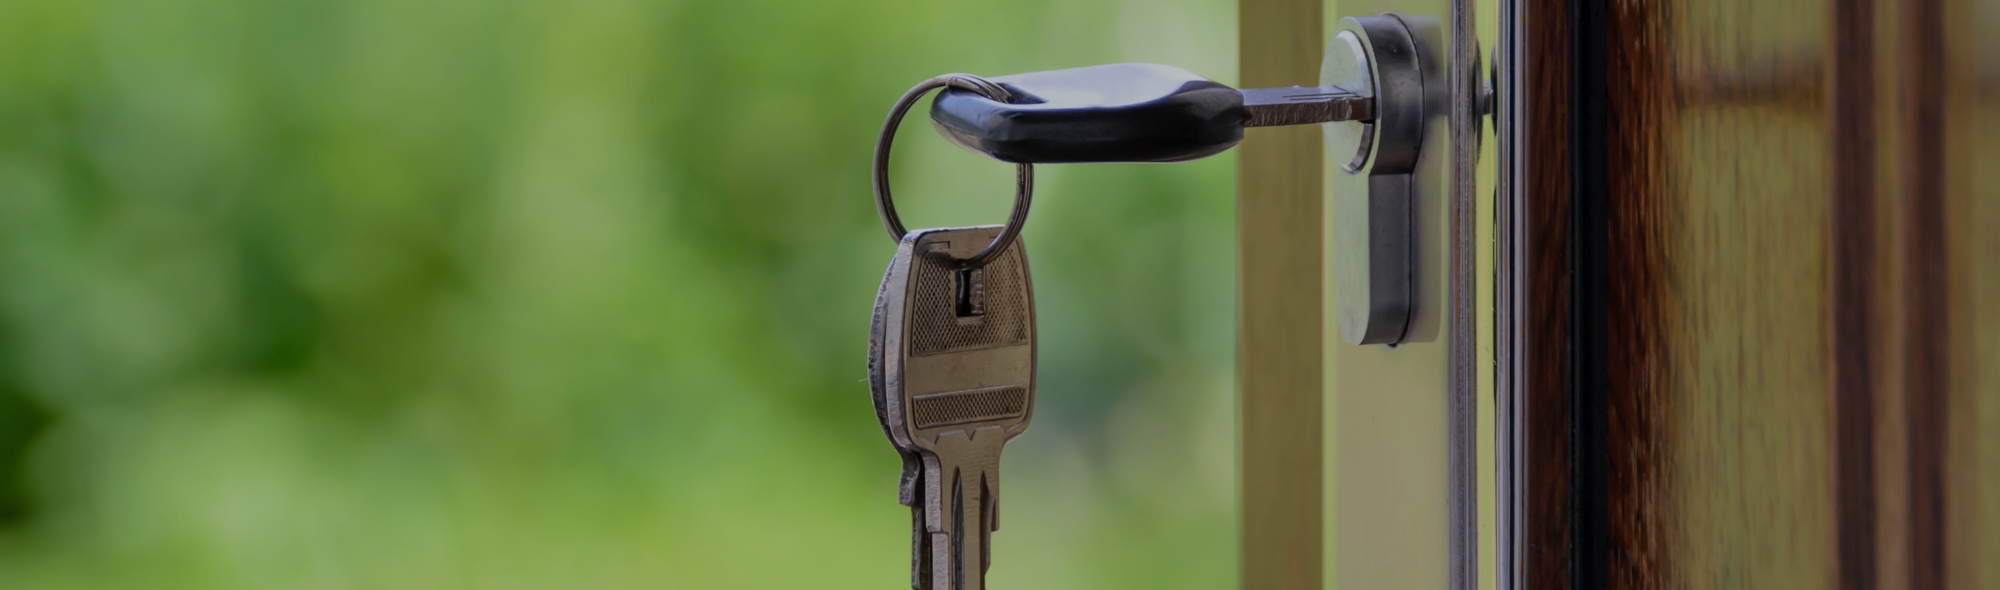 Updated: Keys to Finding a Great Real Estate Agent